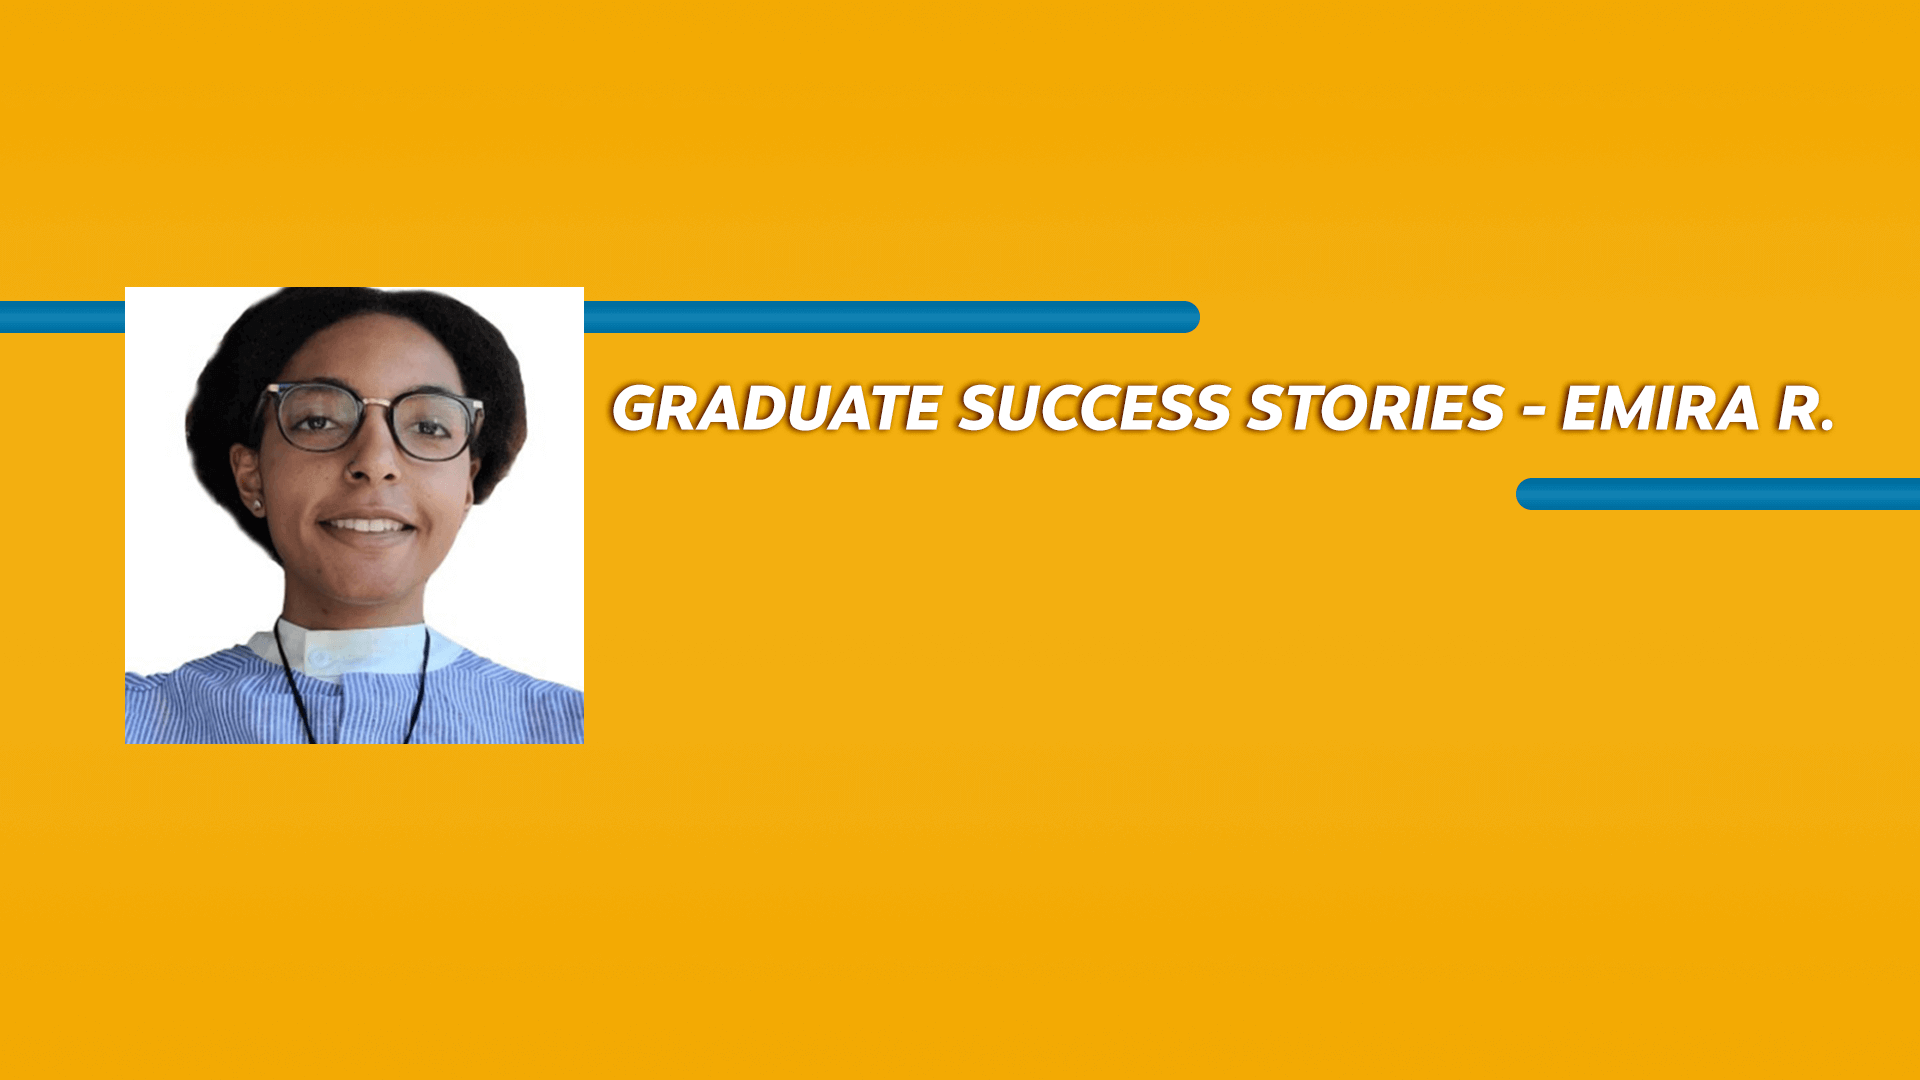 Orange rectangle with a picture of a woman and Graduate Success Stories - Emira R. text in white font